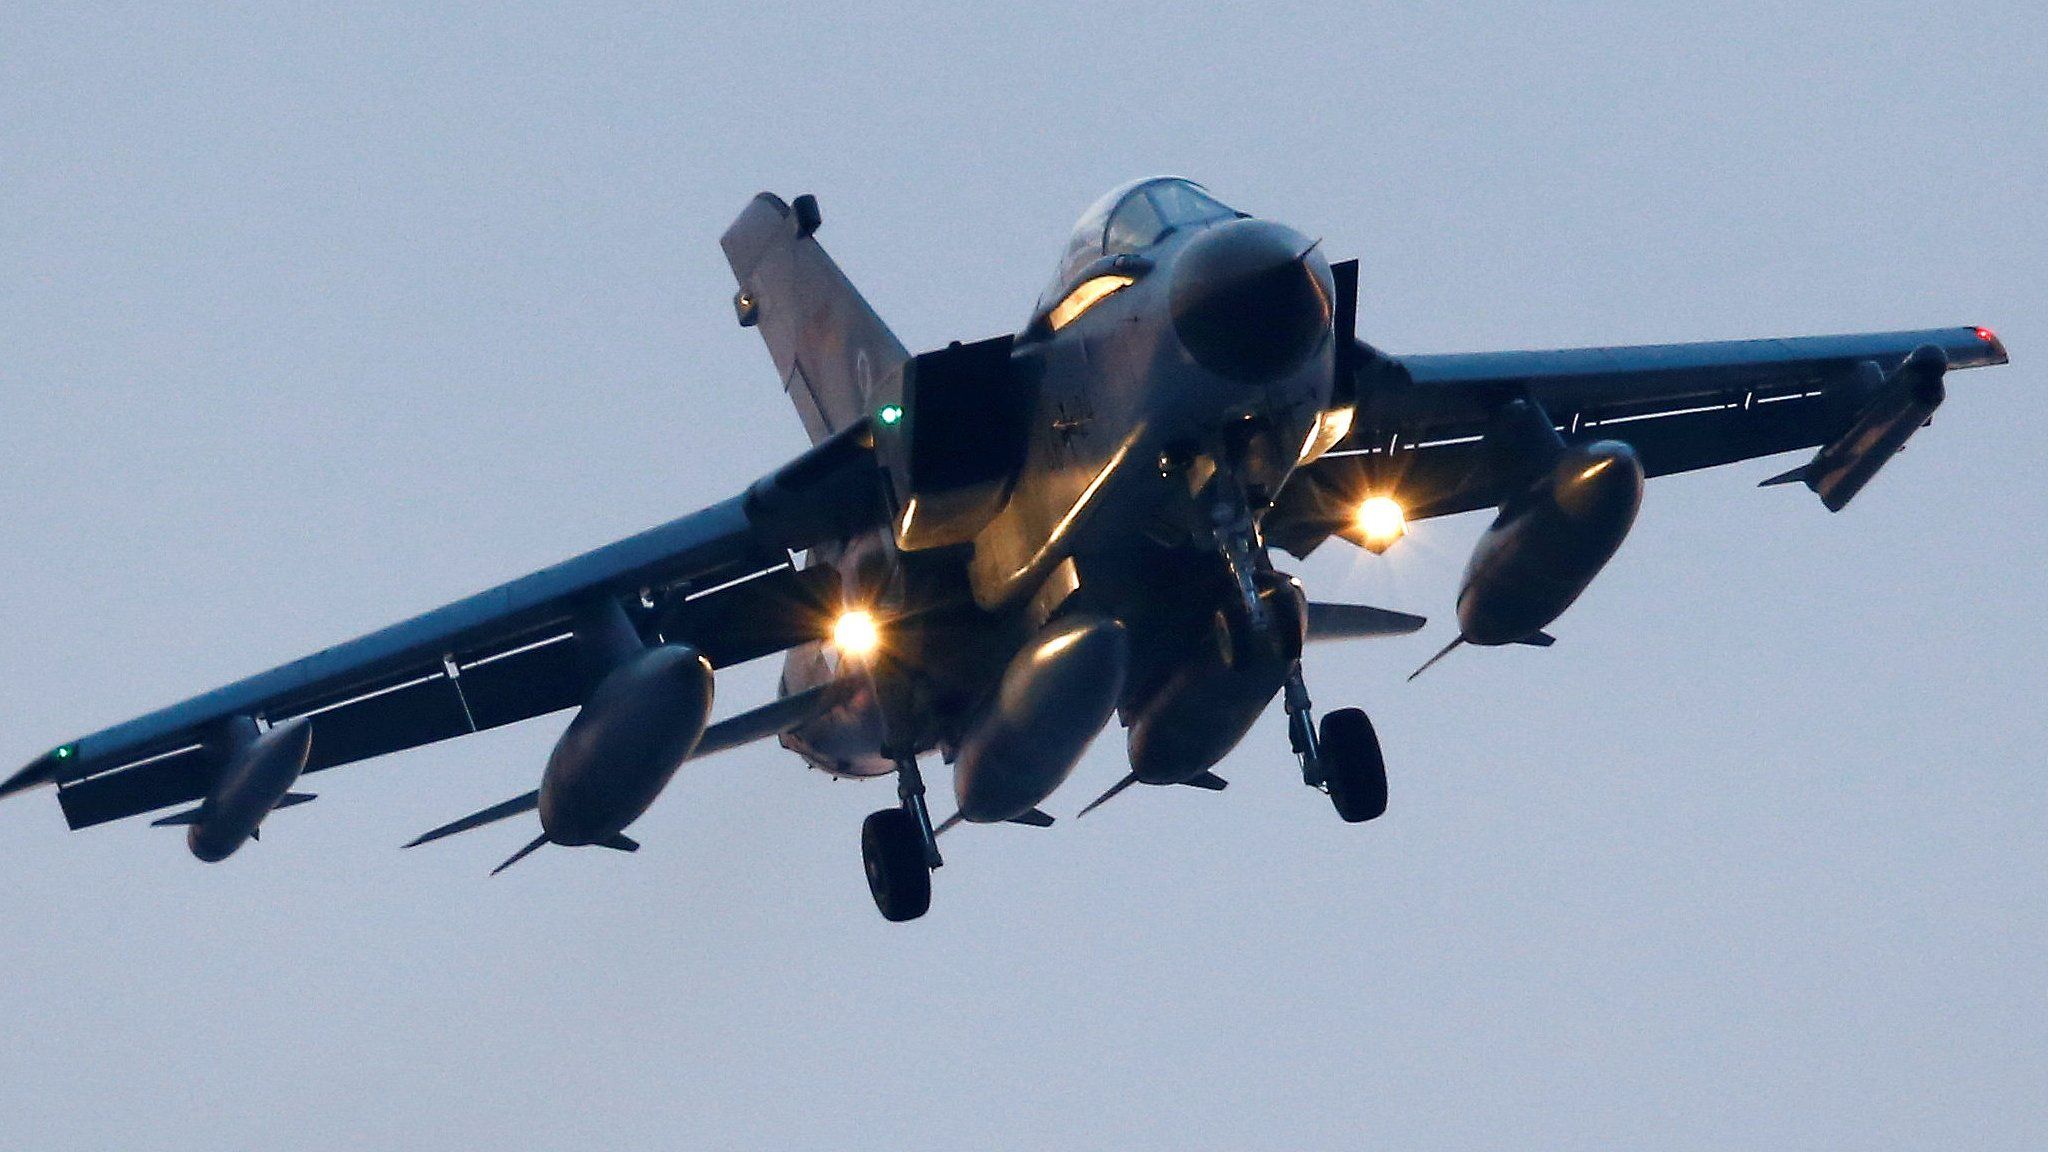 A German air force Tornado jet approaches to land at Incirlik airbase, in Adana, Turkey, December 10, 2015